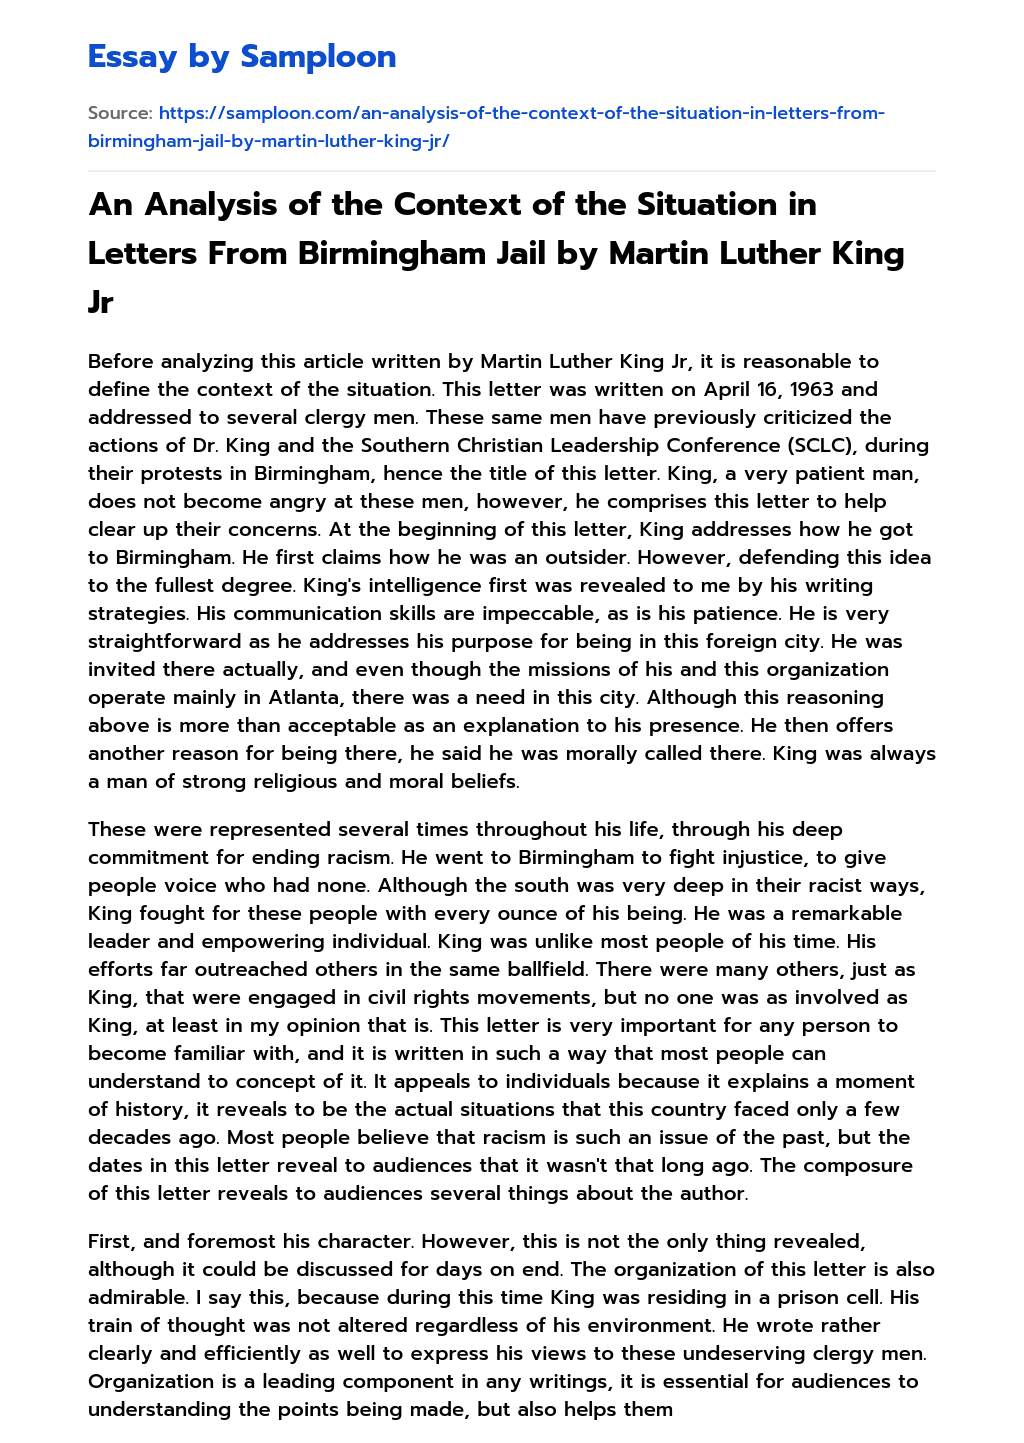 An Analysis of the Context of the Situation in Letters From Birmingham Jail by Martin Luther King Jr essay